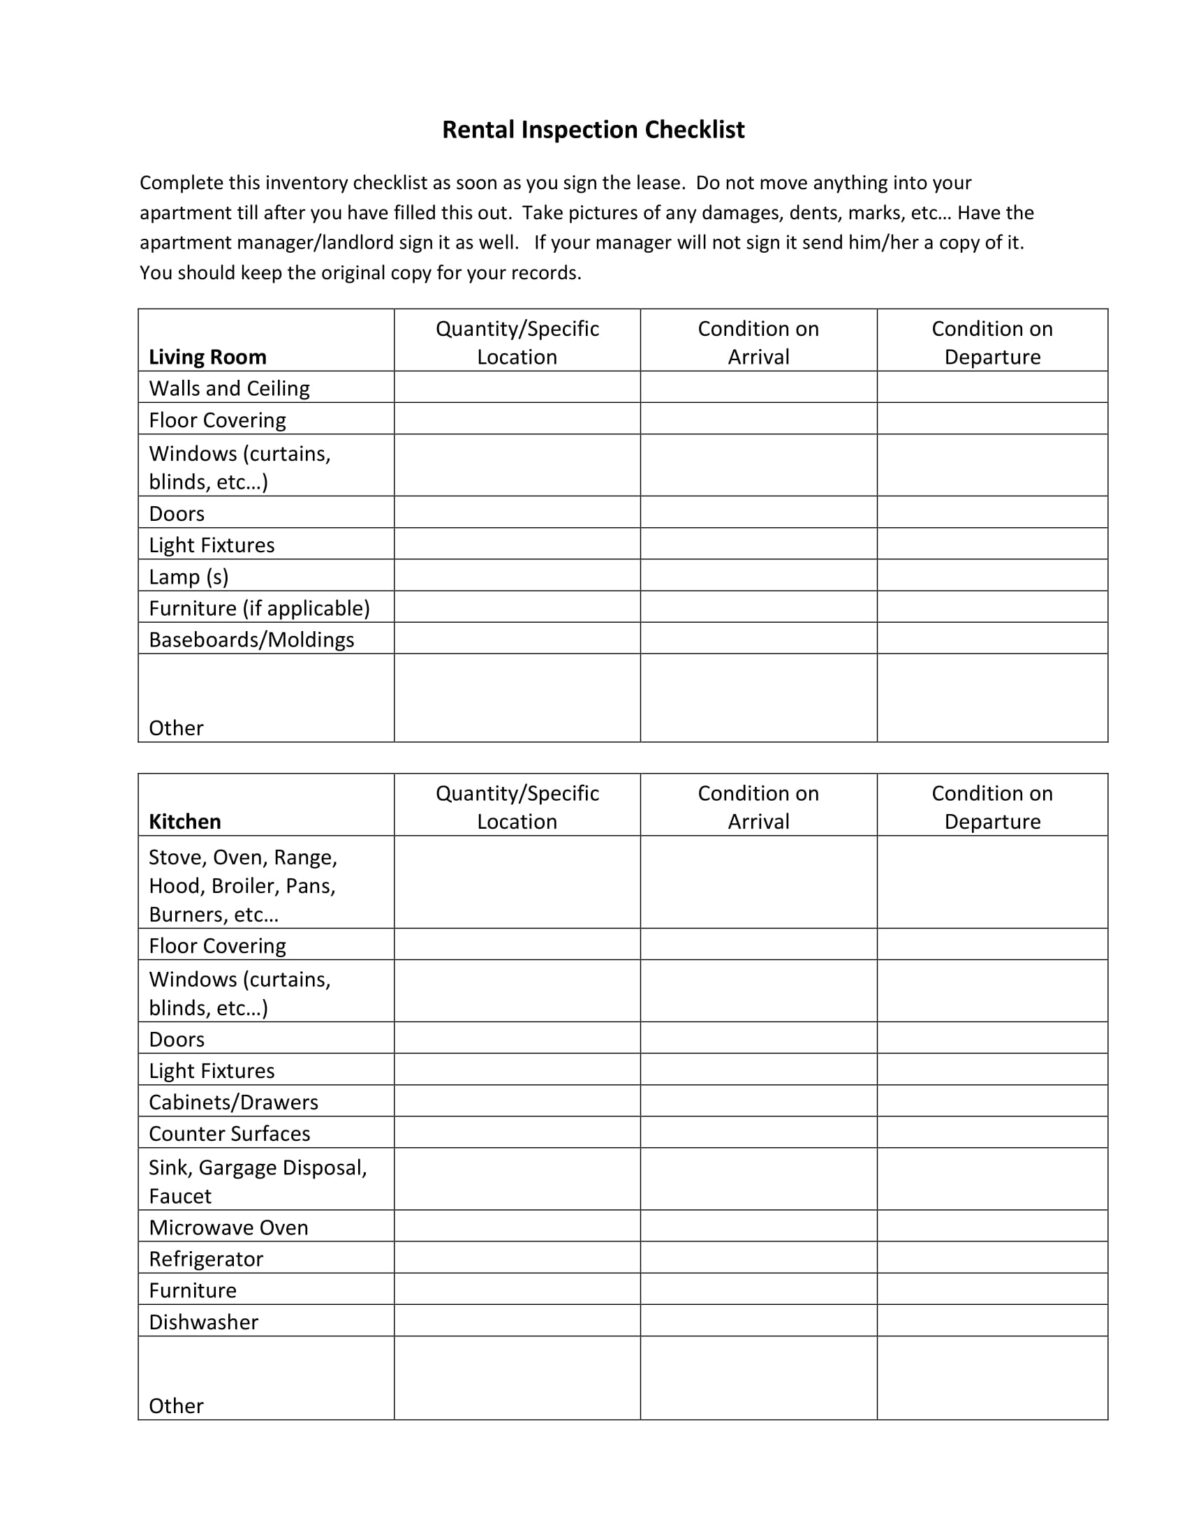 10 Rental Checklist Examples Pdf Examples For Condition Of Rental Property Checklist Template 1187x1536 